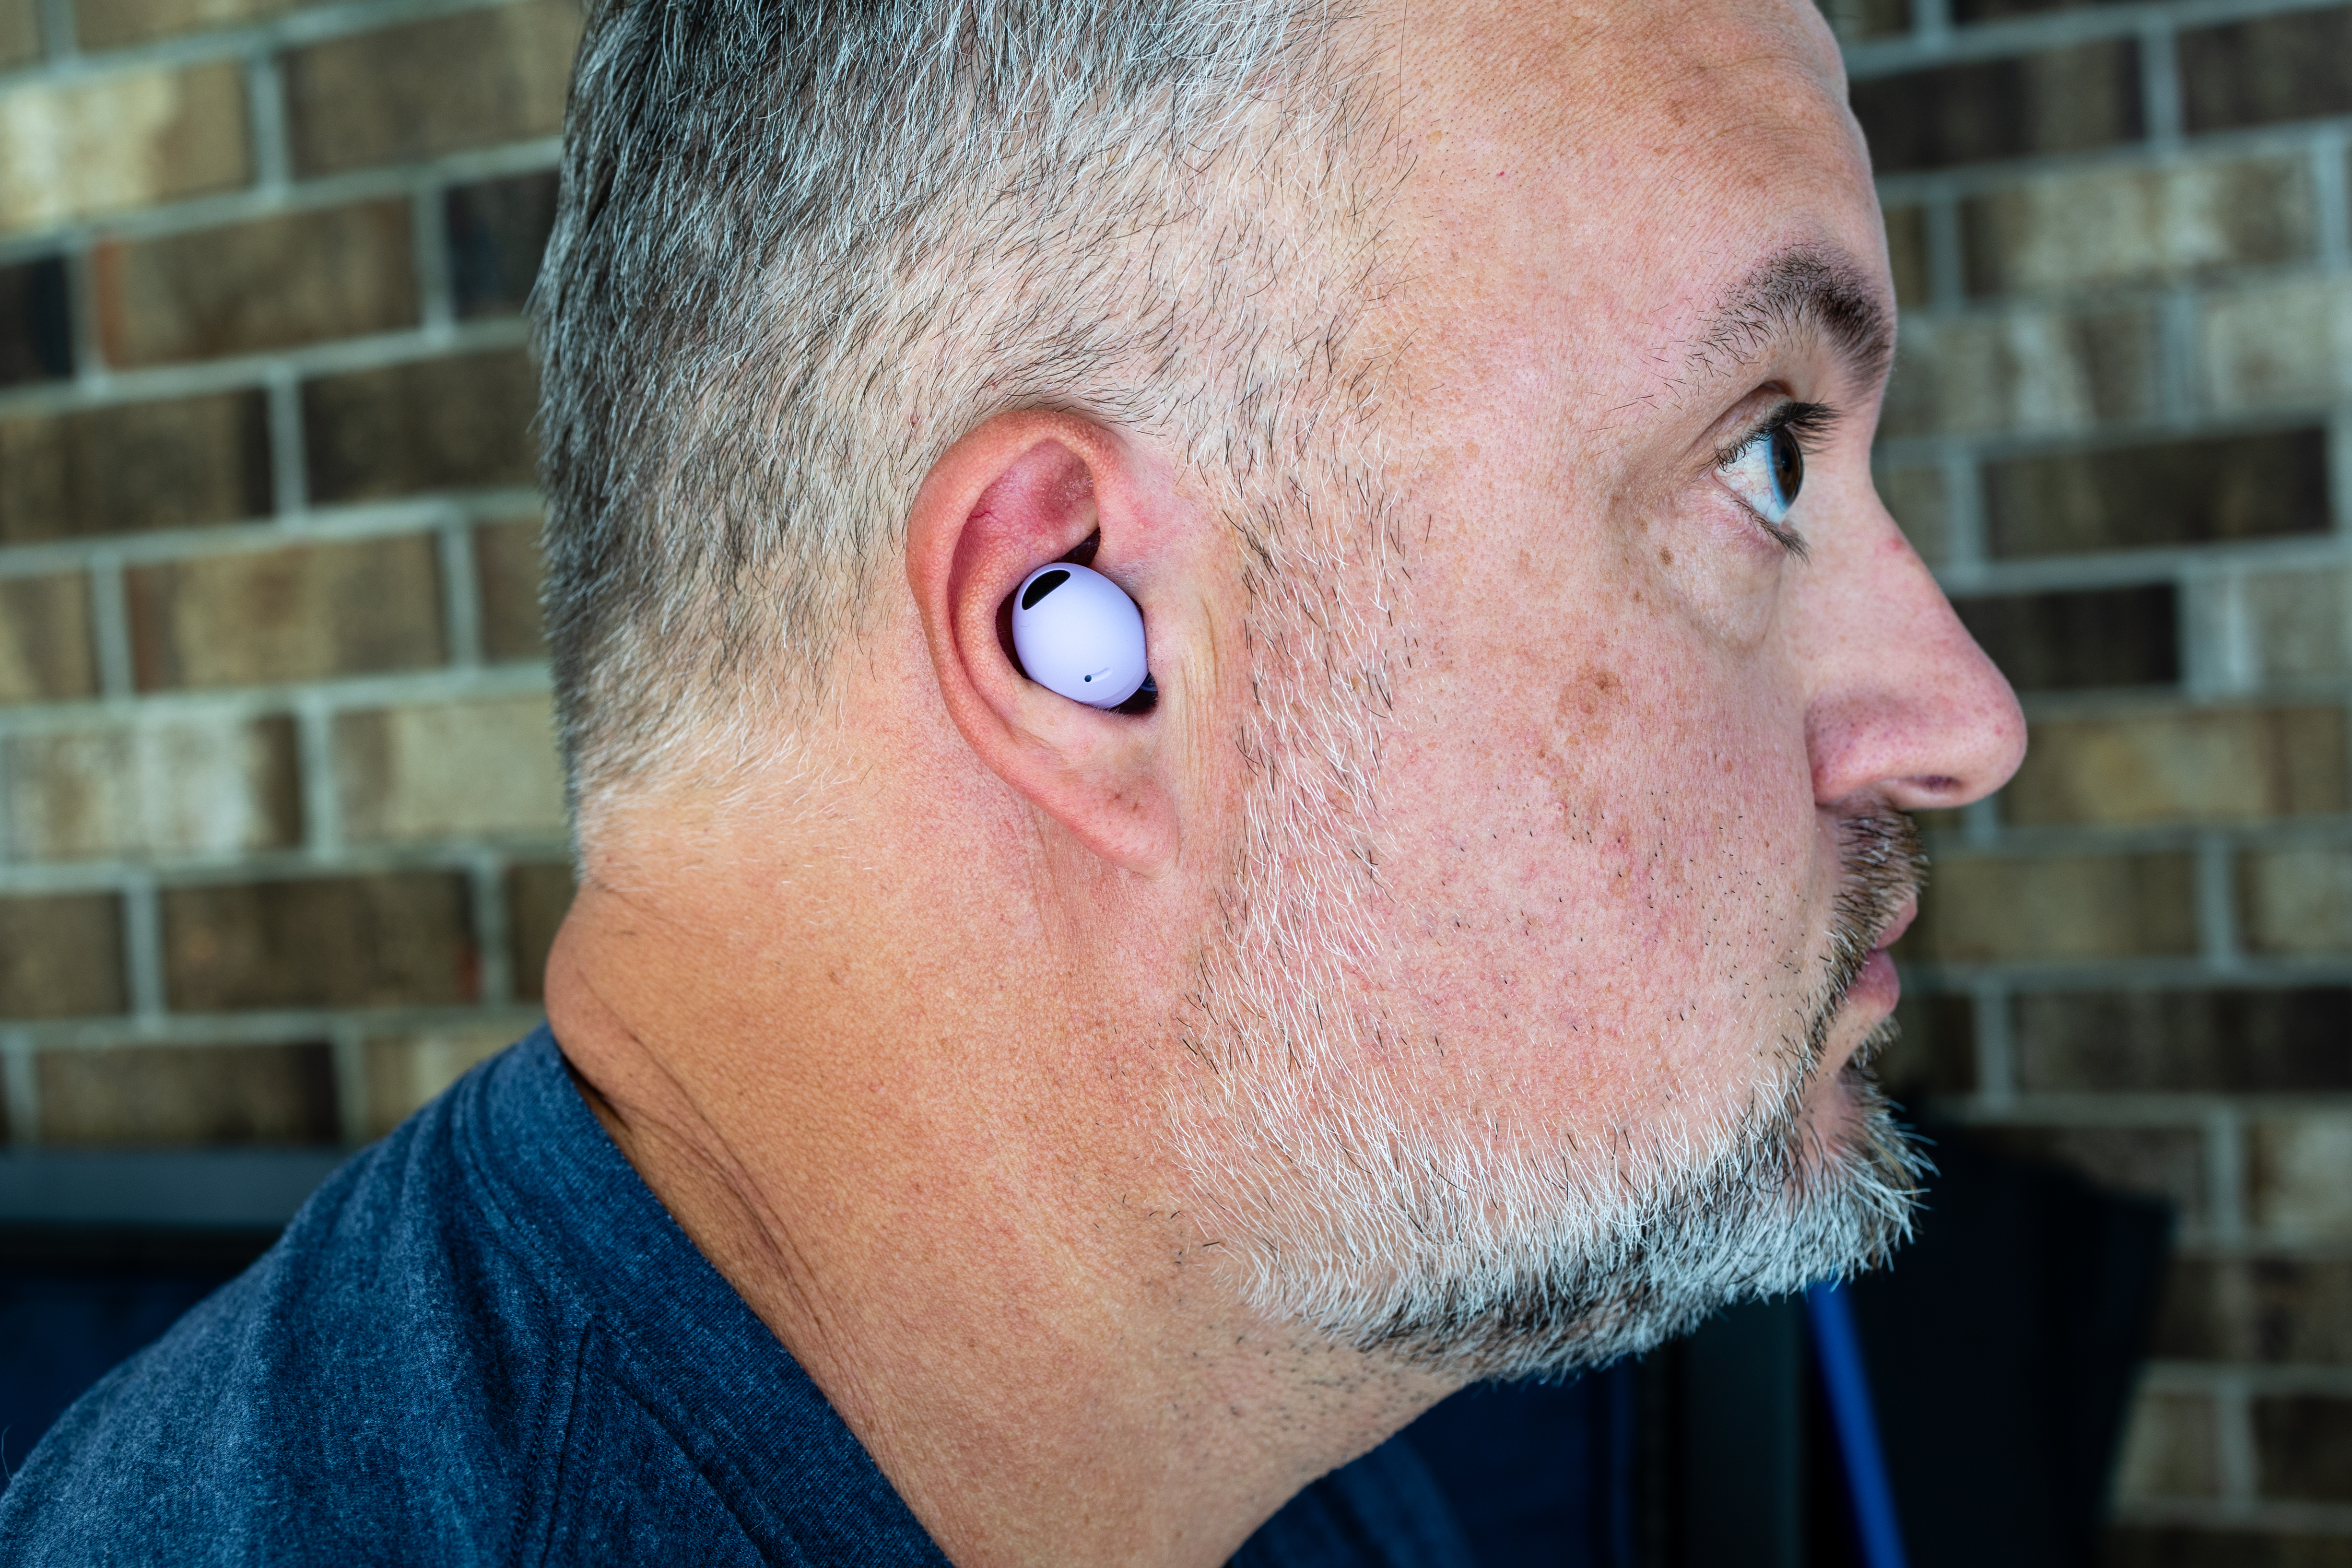 Samsung Galaxy Buds2 Pro Review: Great Sound, Comfortable Fit